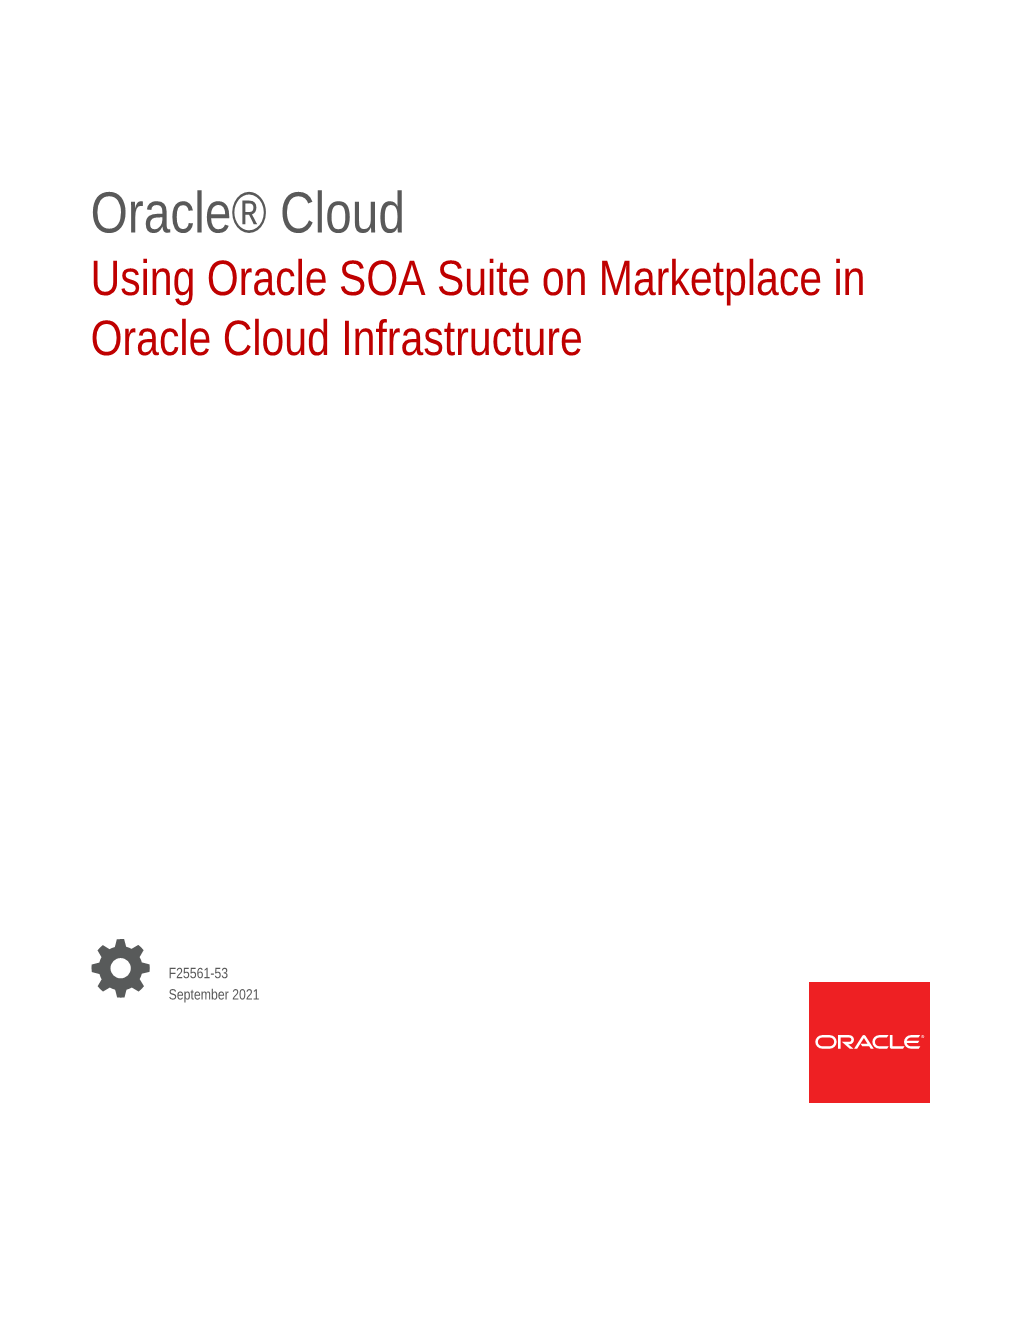 Using Oracle SOA Suite on Marketplace in Oracle Cloud Infrastructure